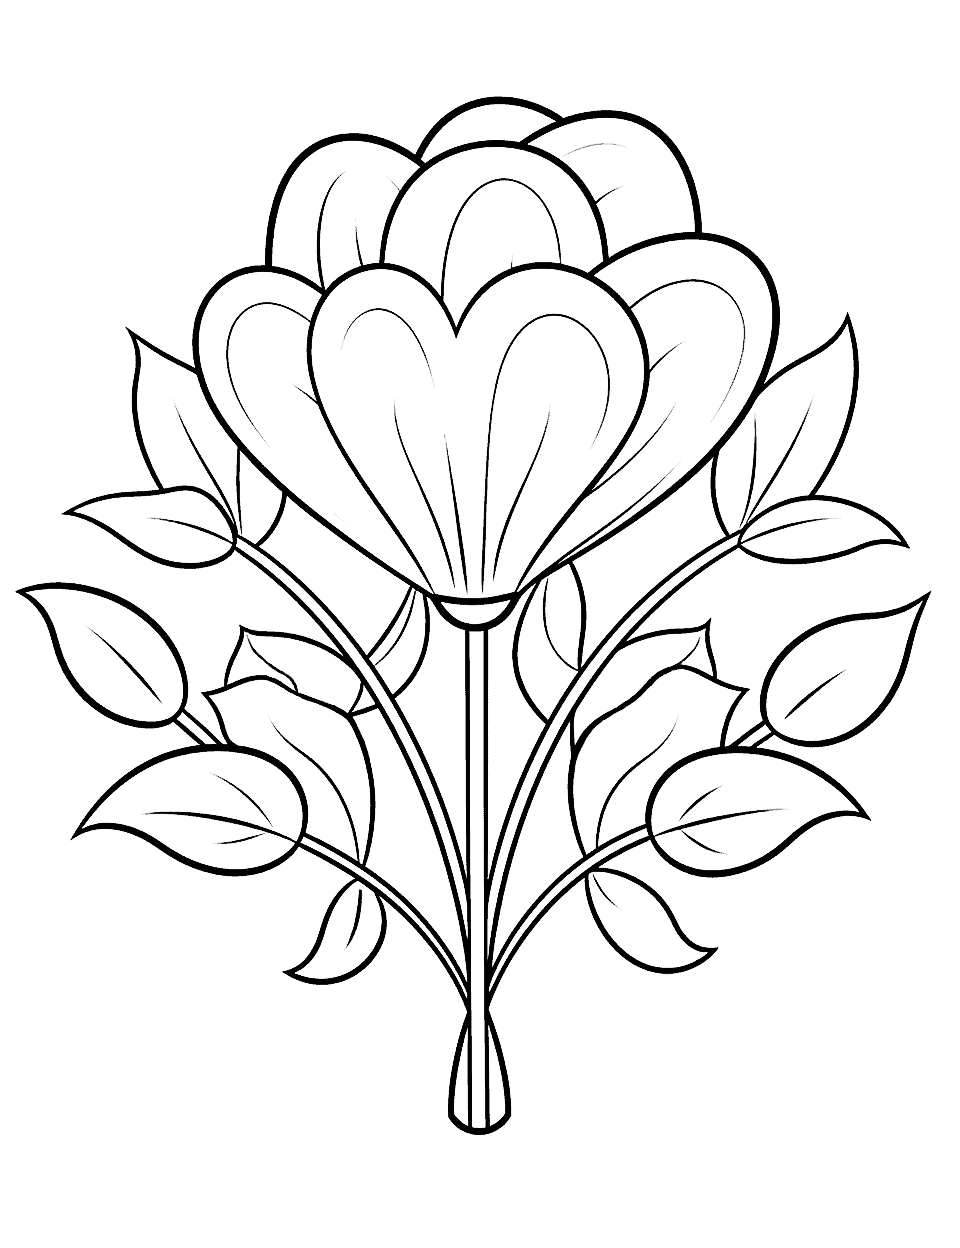 Tulip Heart for Kindergarten Flower Coloring Page - A simple heart design filled with tulips, suitable for kindergarteners.